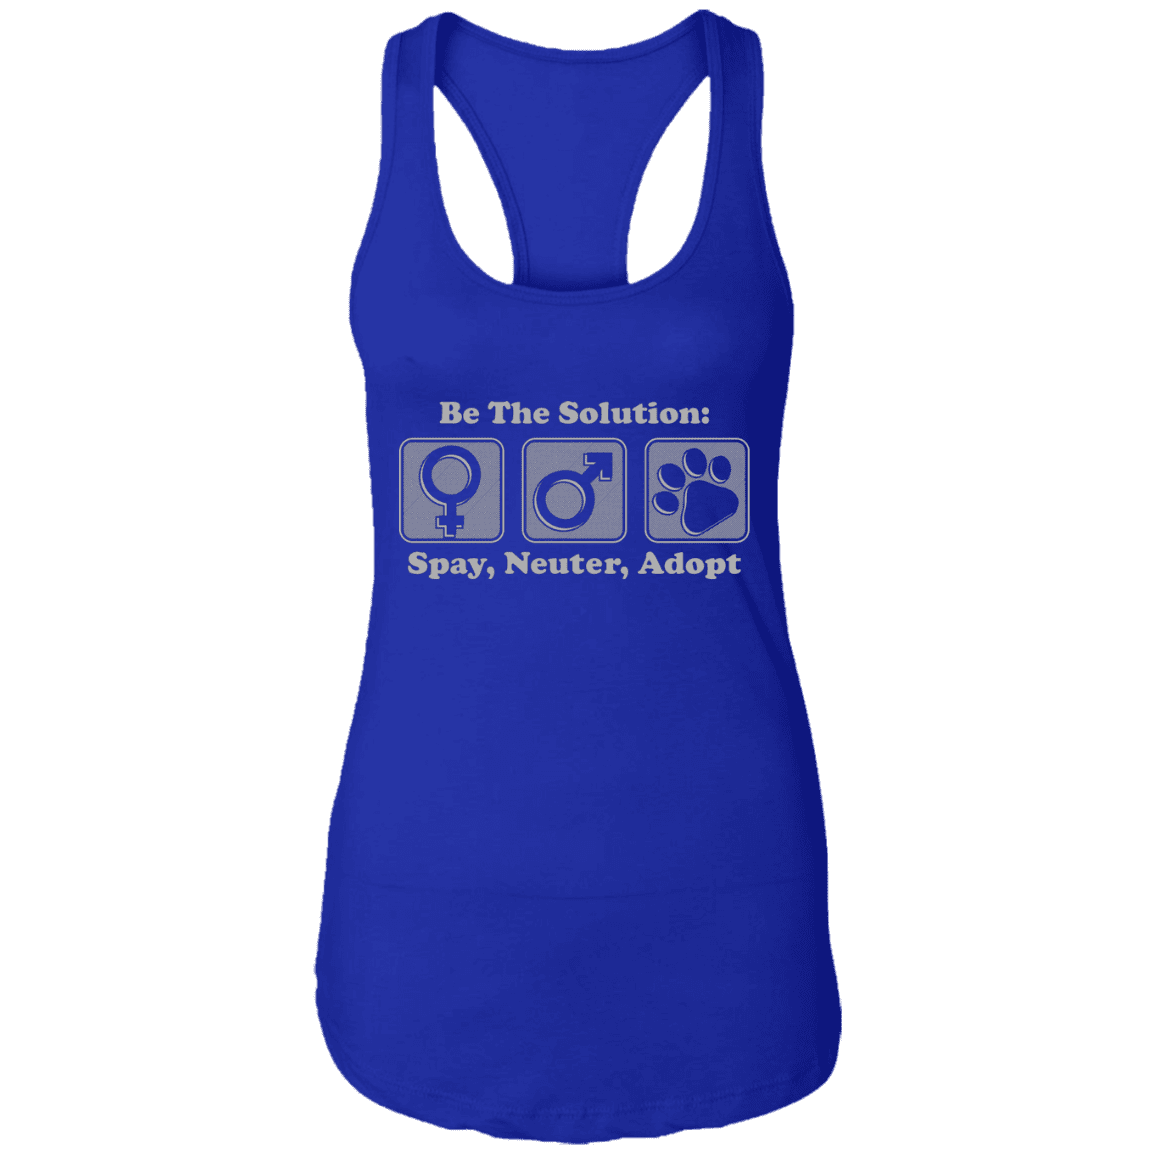 Be The Solution - Ladies Racer Back Tank.